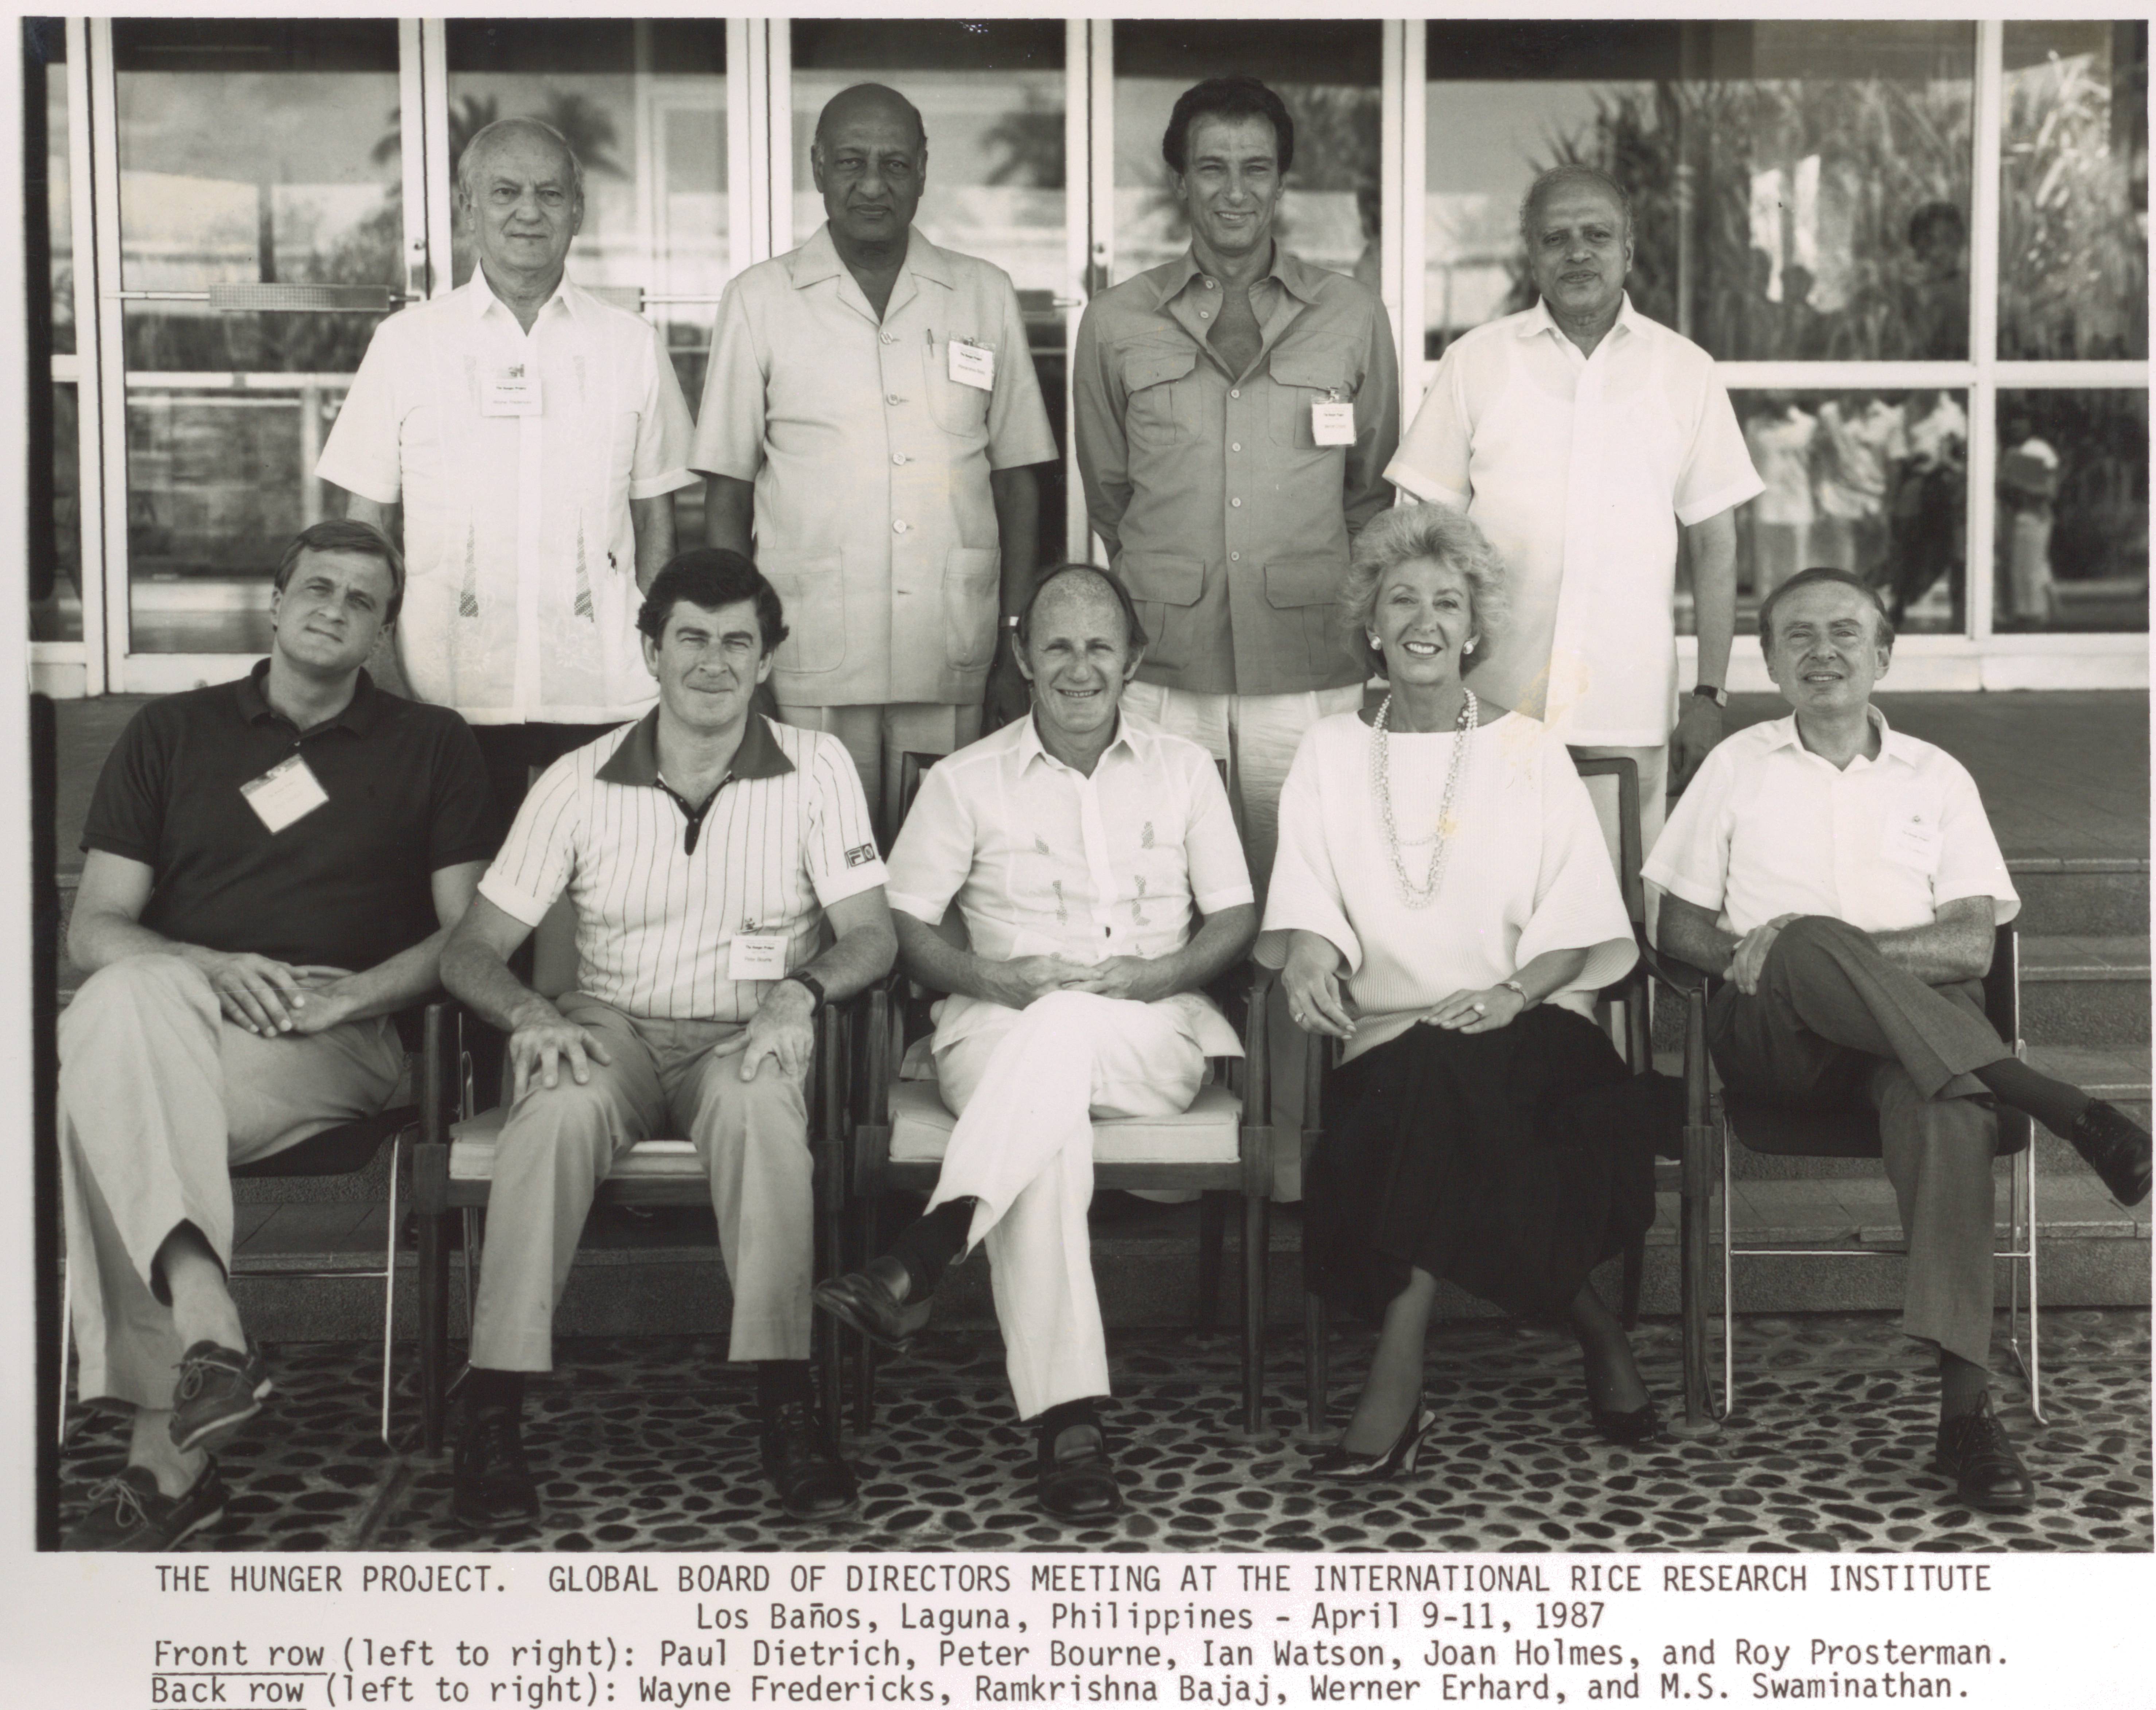 M.S. Swaminathan and the Hunger Project,Global Board of Directors Meeting at the International Rice Research Institute, Los Banos, Laguna, Philippines